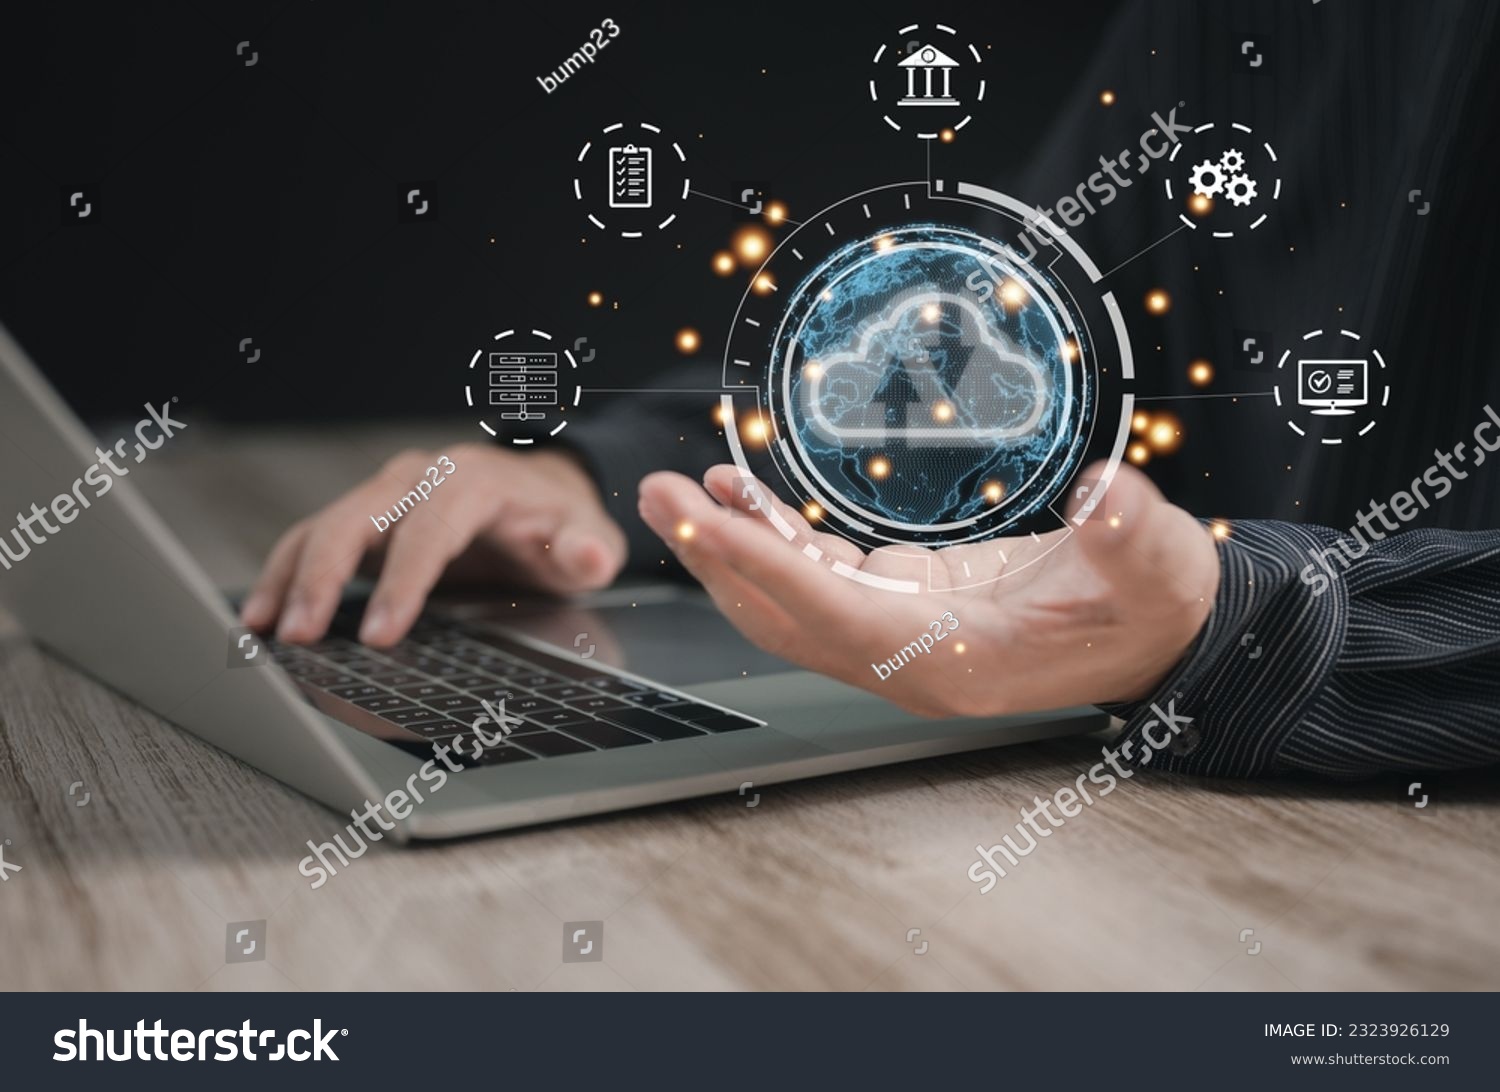 Concept of using cloud computing to store data : Business man holding are using cloud computing to store important data such as big data , financial and banking , digital marketing by global internet #2323926129